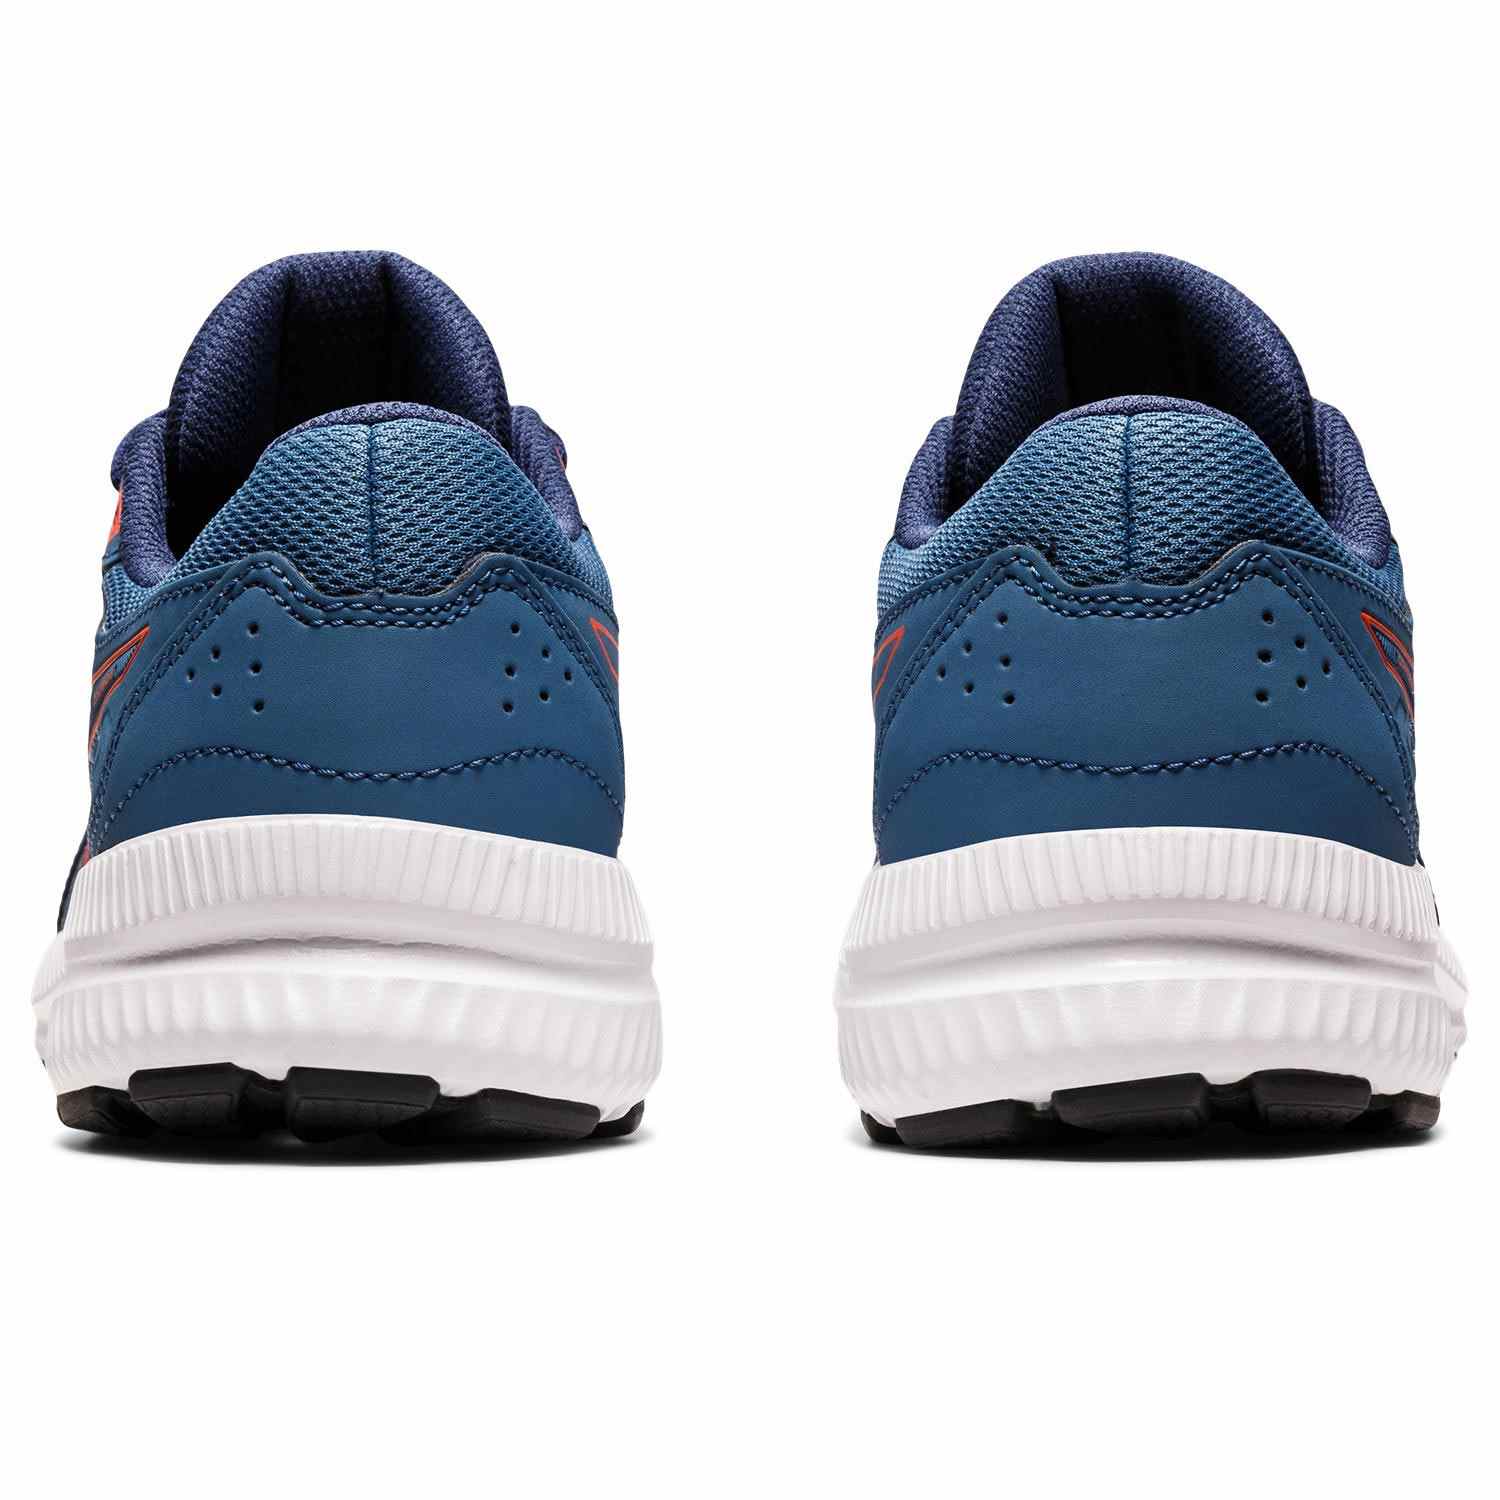 ASICS CONTEND™ 8 KIDS TRAINERS